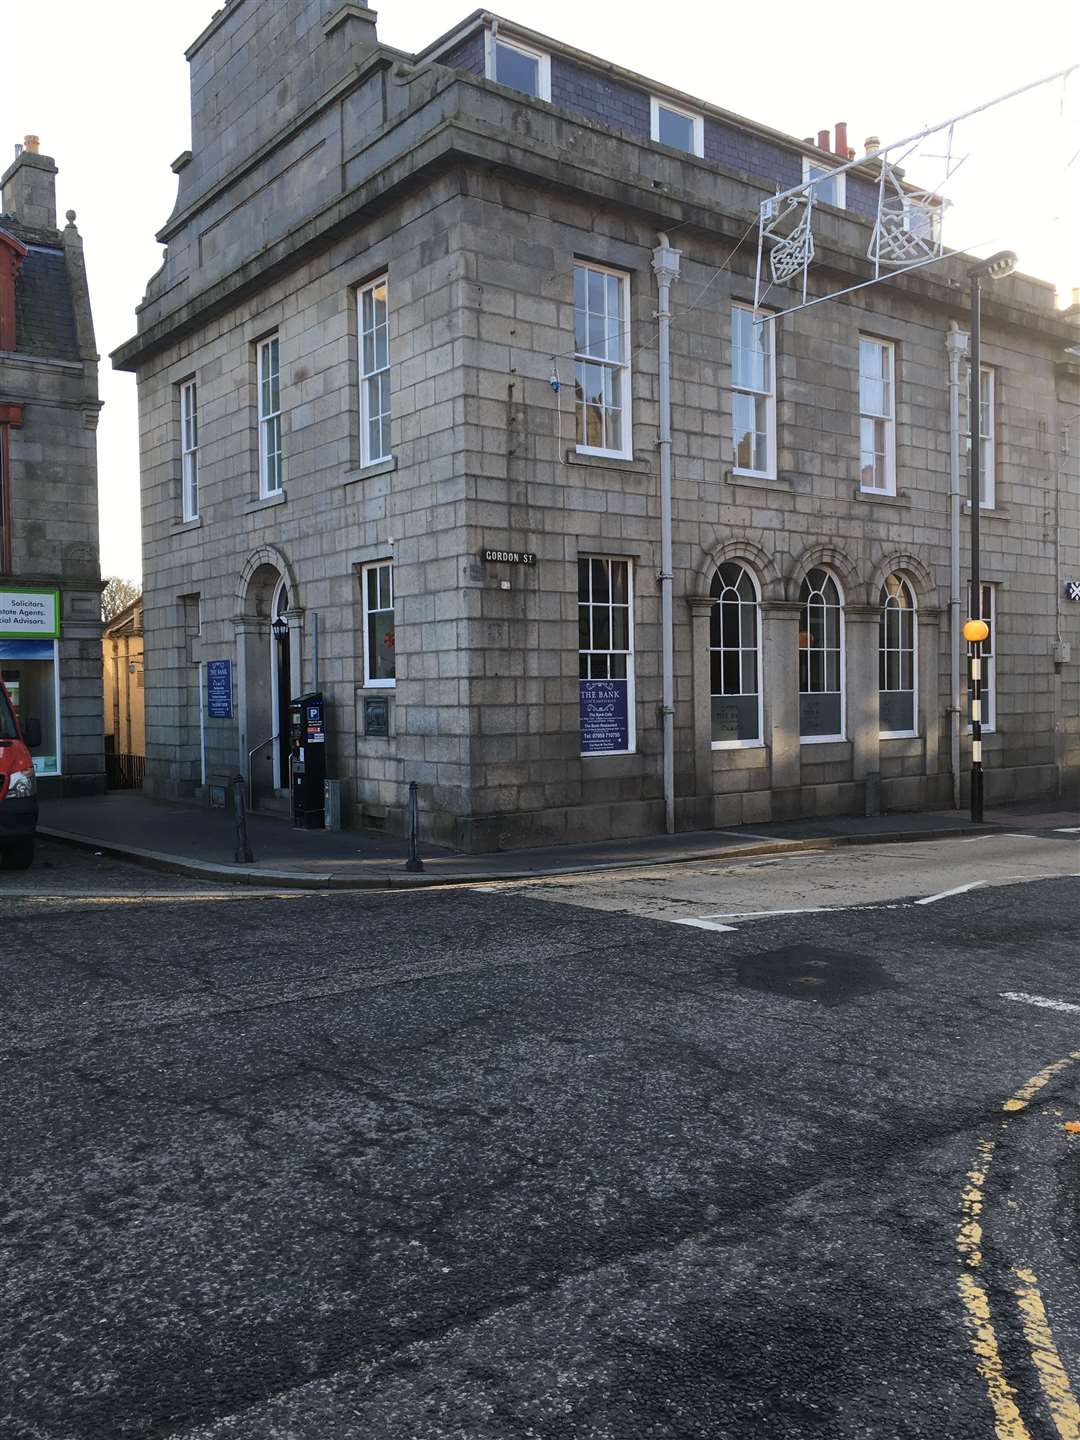 The Bank restaurant in Huntly has closed and is for sale.